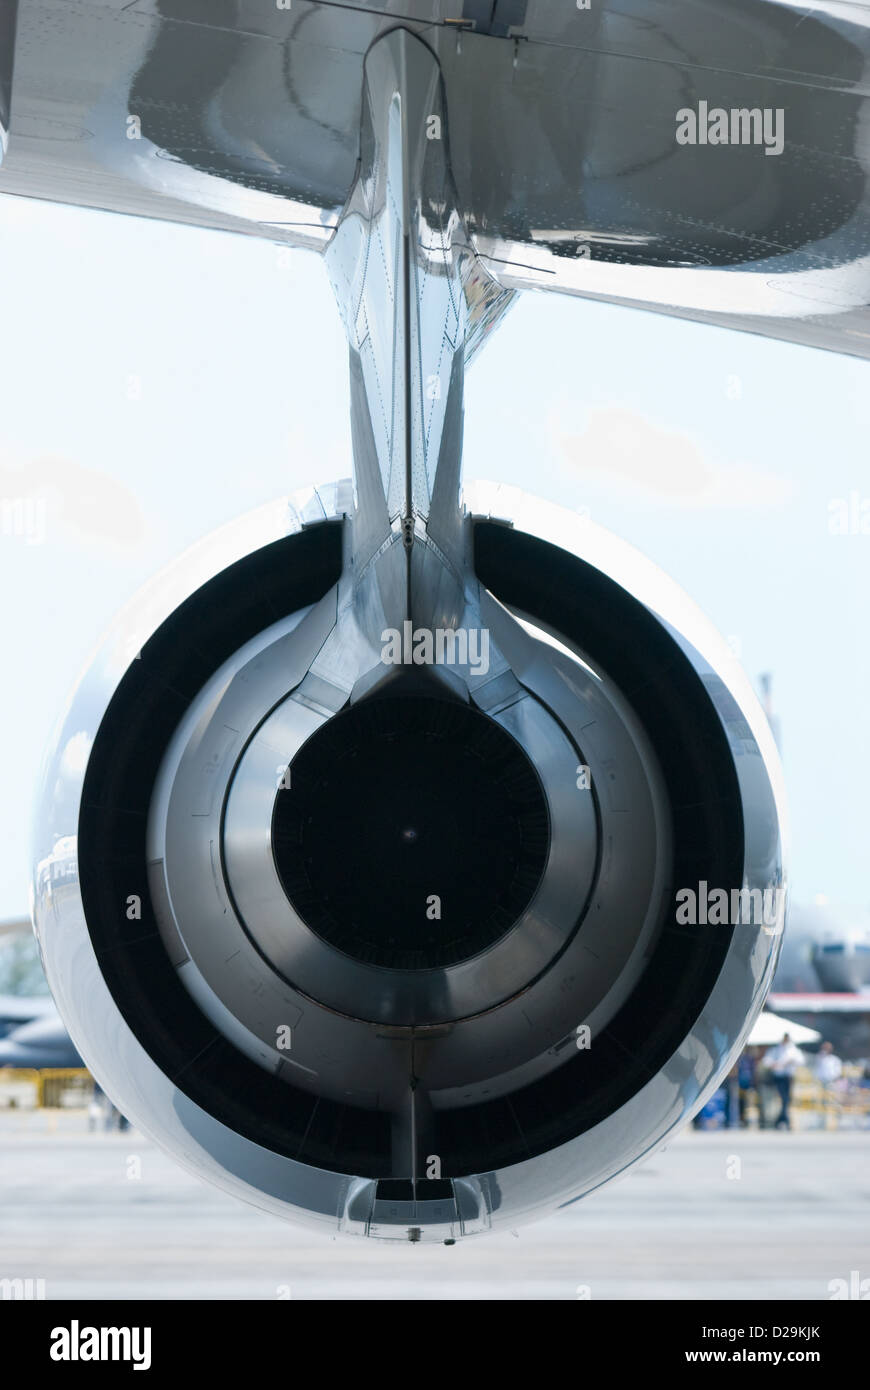 Back view of a jet engine Stock Photo